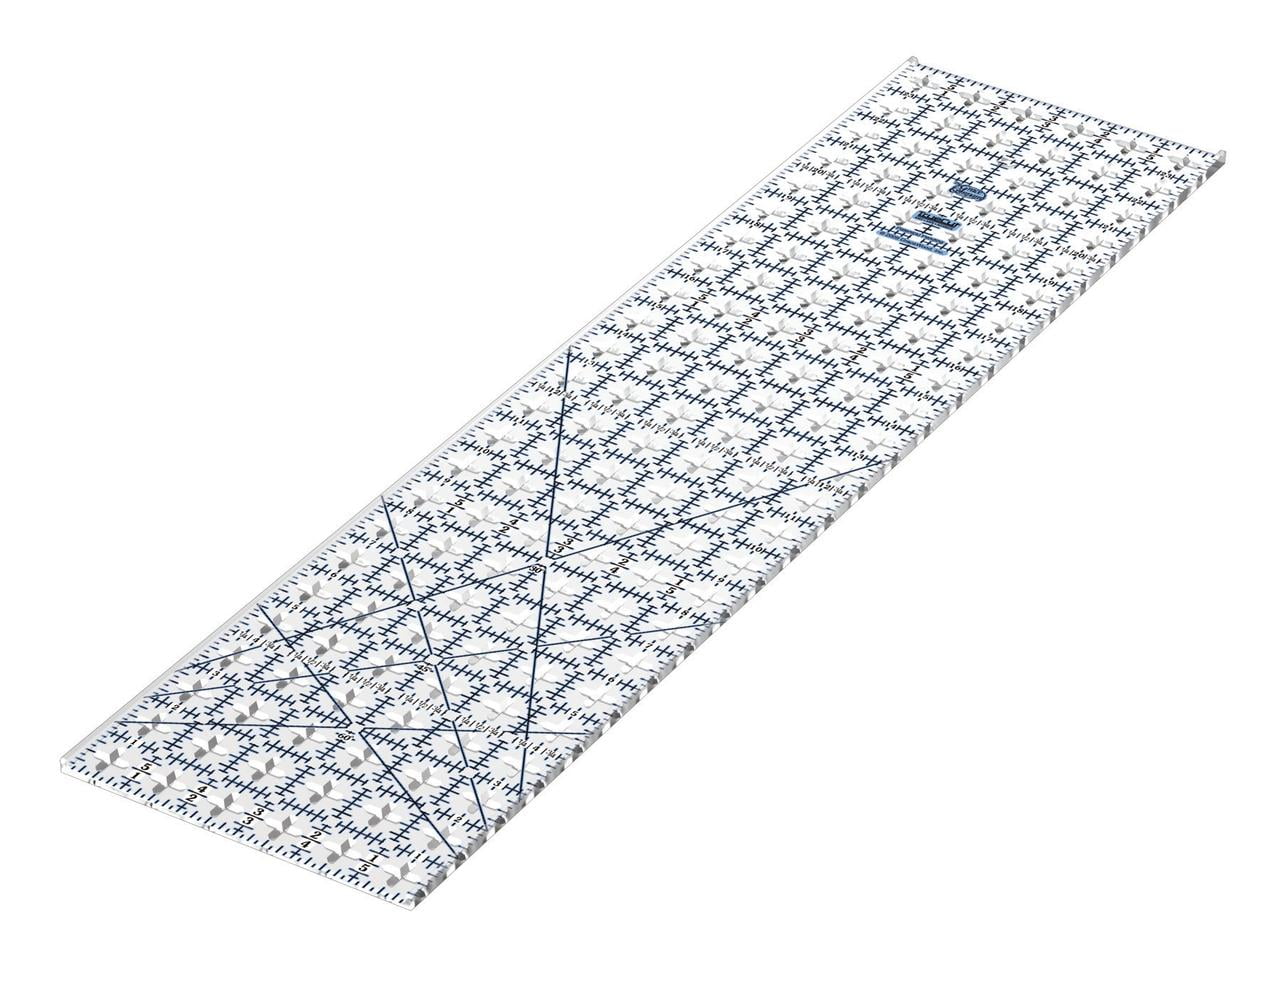 NX Garden 6X 6inch Quilting Ruler Square Non-Slip Acrylic Quilting Rulerfor Quilting, Sewing and DIY Crafts Fabric Cutting Ruler